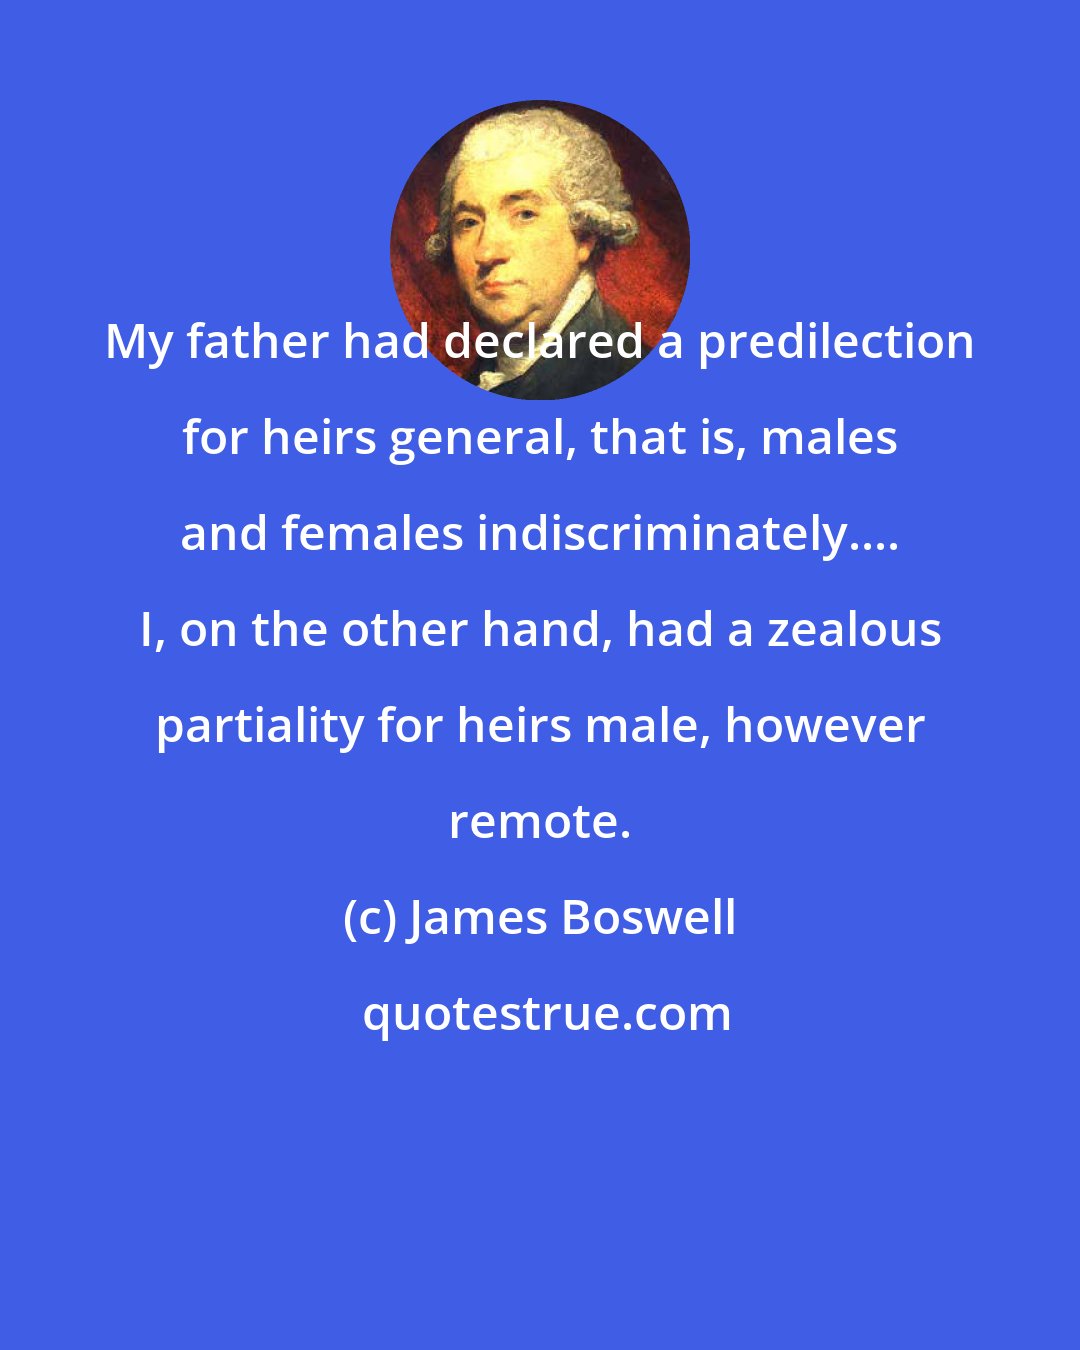 James Boswell: My father had declared a predilection for heirs general, that is, males and females indiscriminately.... I, on the other hand, had a zealous partiality for heirs male, however remote.